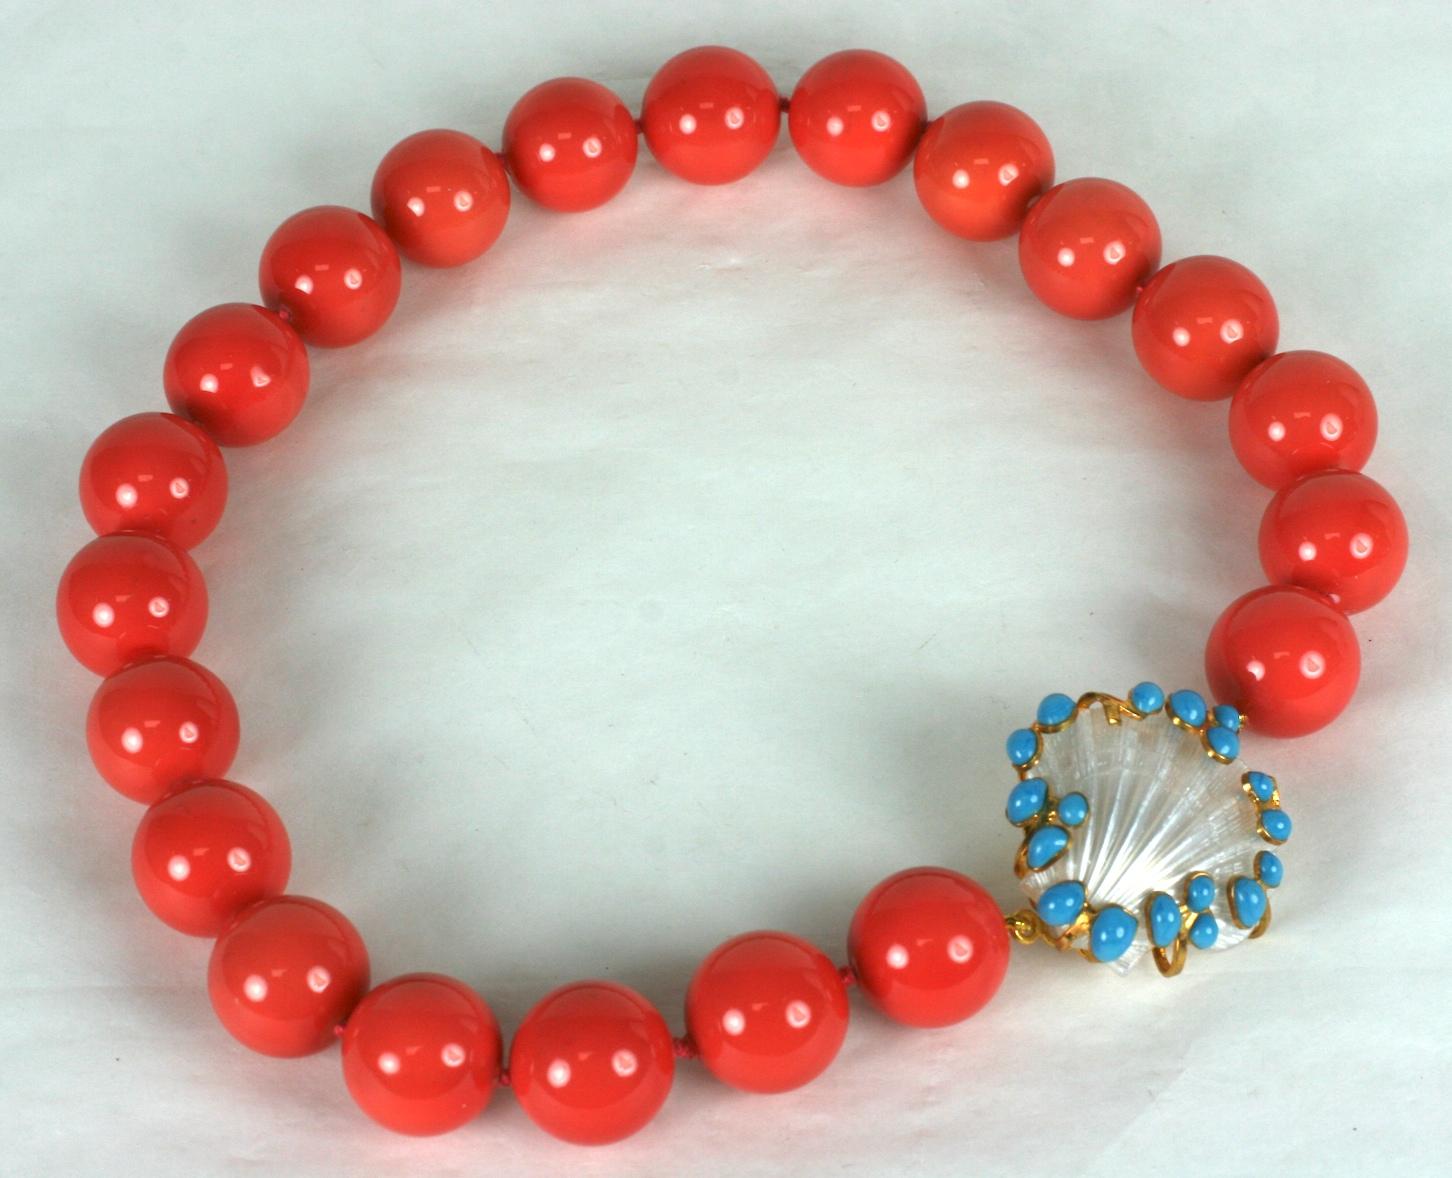 Coral lacquered hand knotted Mother of pearl beads with custom shell clasp with poured glass turquoise cabochons. Clasp is vintage resin shell decorated with colorful cabs. Made in the Parisian studios of Mark Walsh Leslie Chin.
Coral beads 17.5